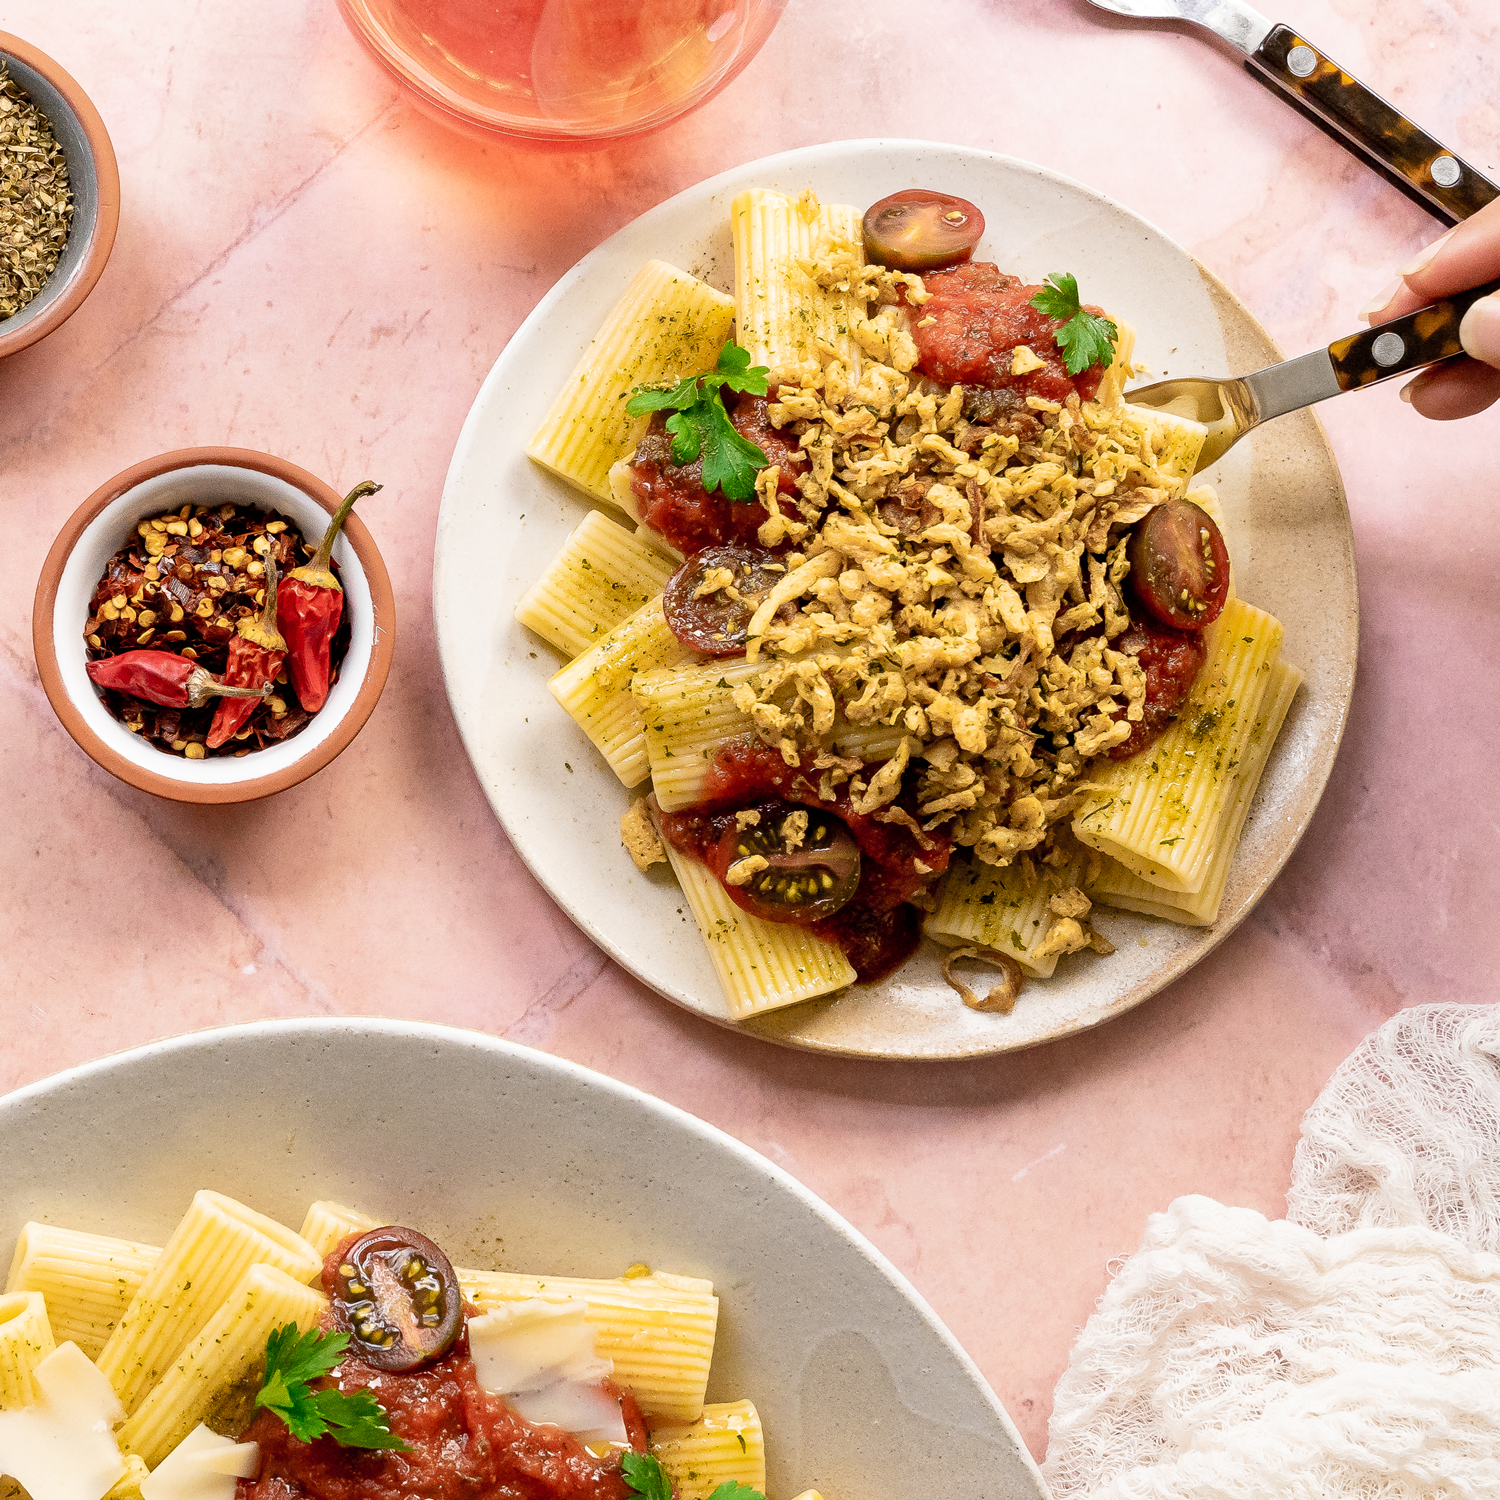 Level up your lunch with crunch and give your pasta a whopping 15 grams of plant-protein.